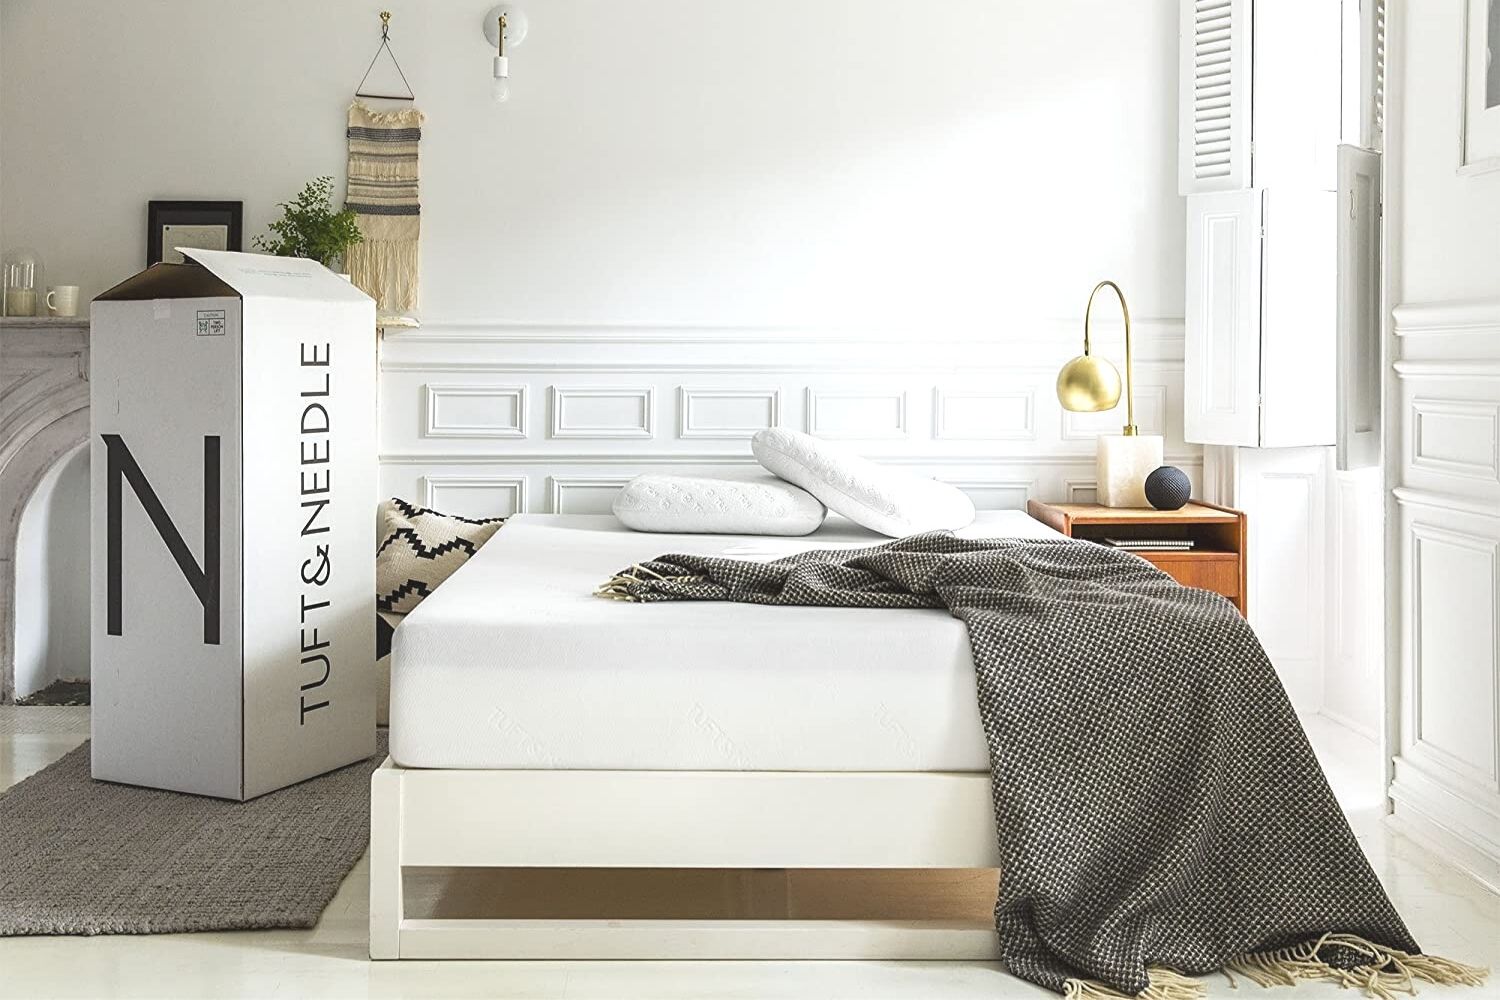 The Best Twin Mattress for Kids Option set up in a bright and simple bedroom